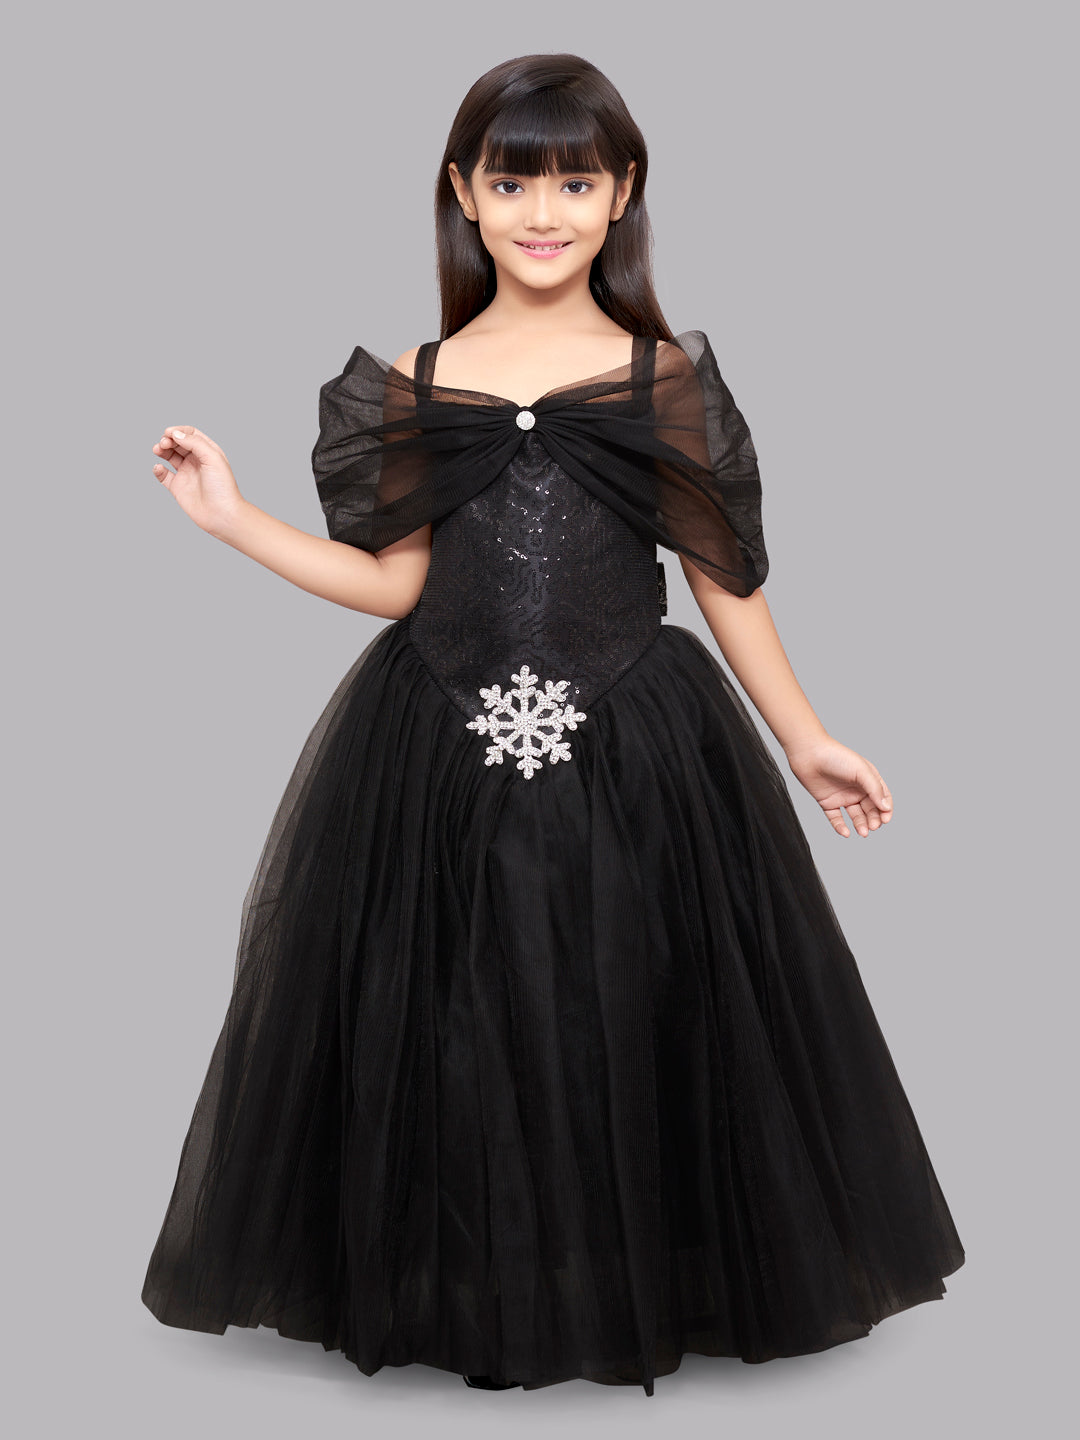 Black Puffy Sleeves Tulle with Lace Long Evening Dress, A-line Back Lo |  Prom dresses long with sleeves, Black lace long sleeve prom dress, Black  long sleeve prom dress